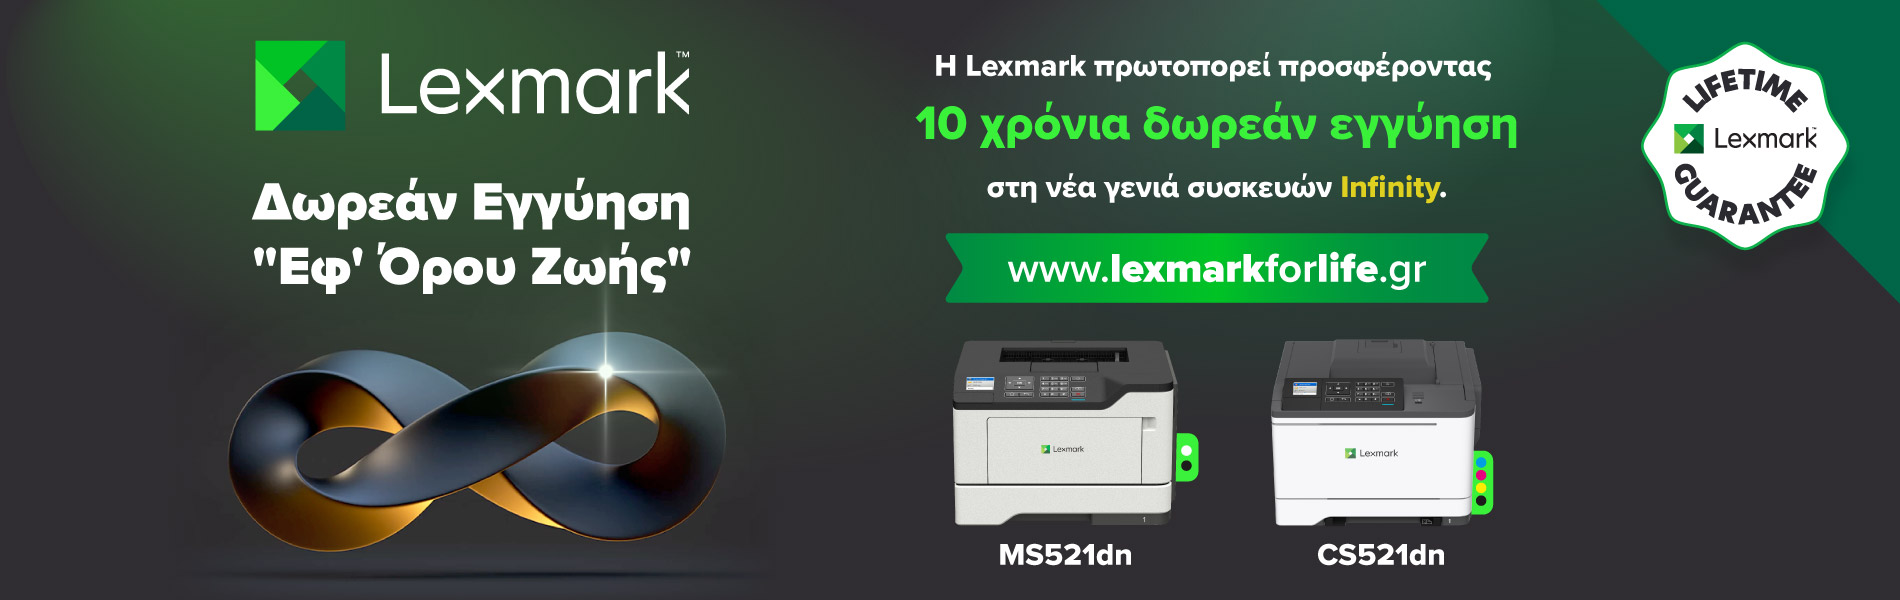 The image shows the Lexmark Infinity warranty program for the Lexmark CS521dn warranty for up to 10 years!